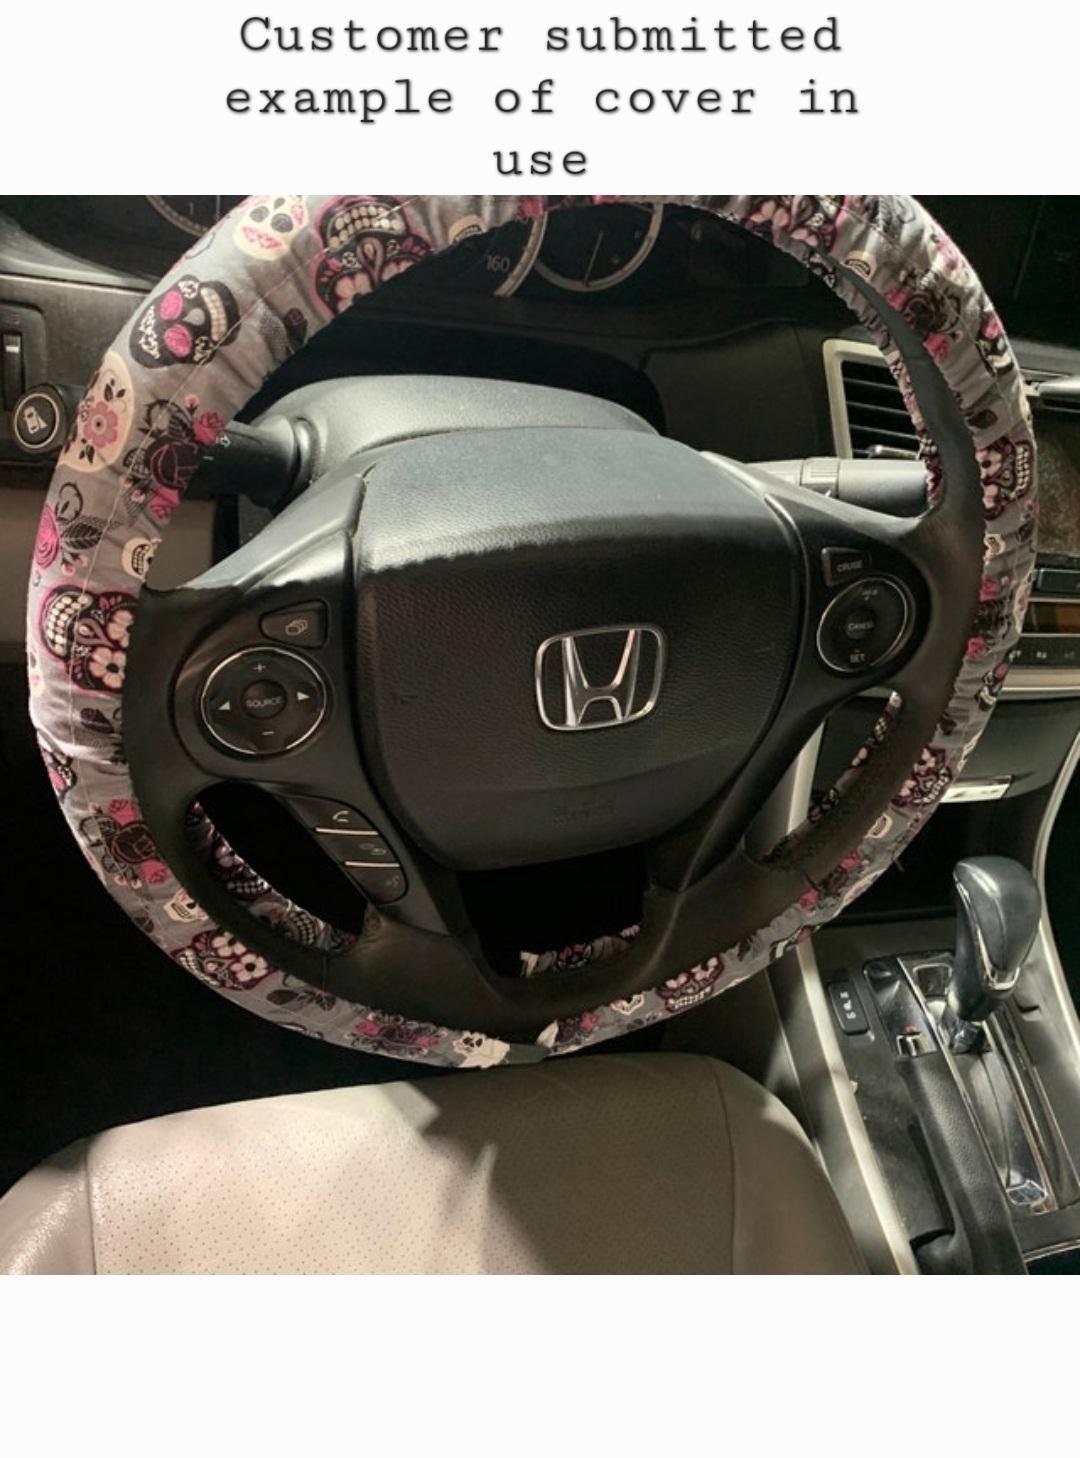 Mouse Steering Wheel Cover made with Licensed Disney Fabric, 100% Cotton, Washable, Custom Car Accessories, Disney Gift, Gift for Her - Harlow's Store and Garden Gifts